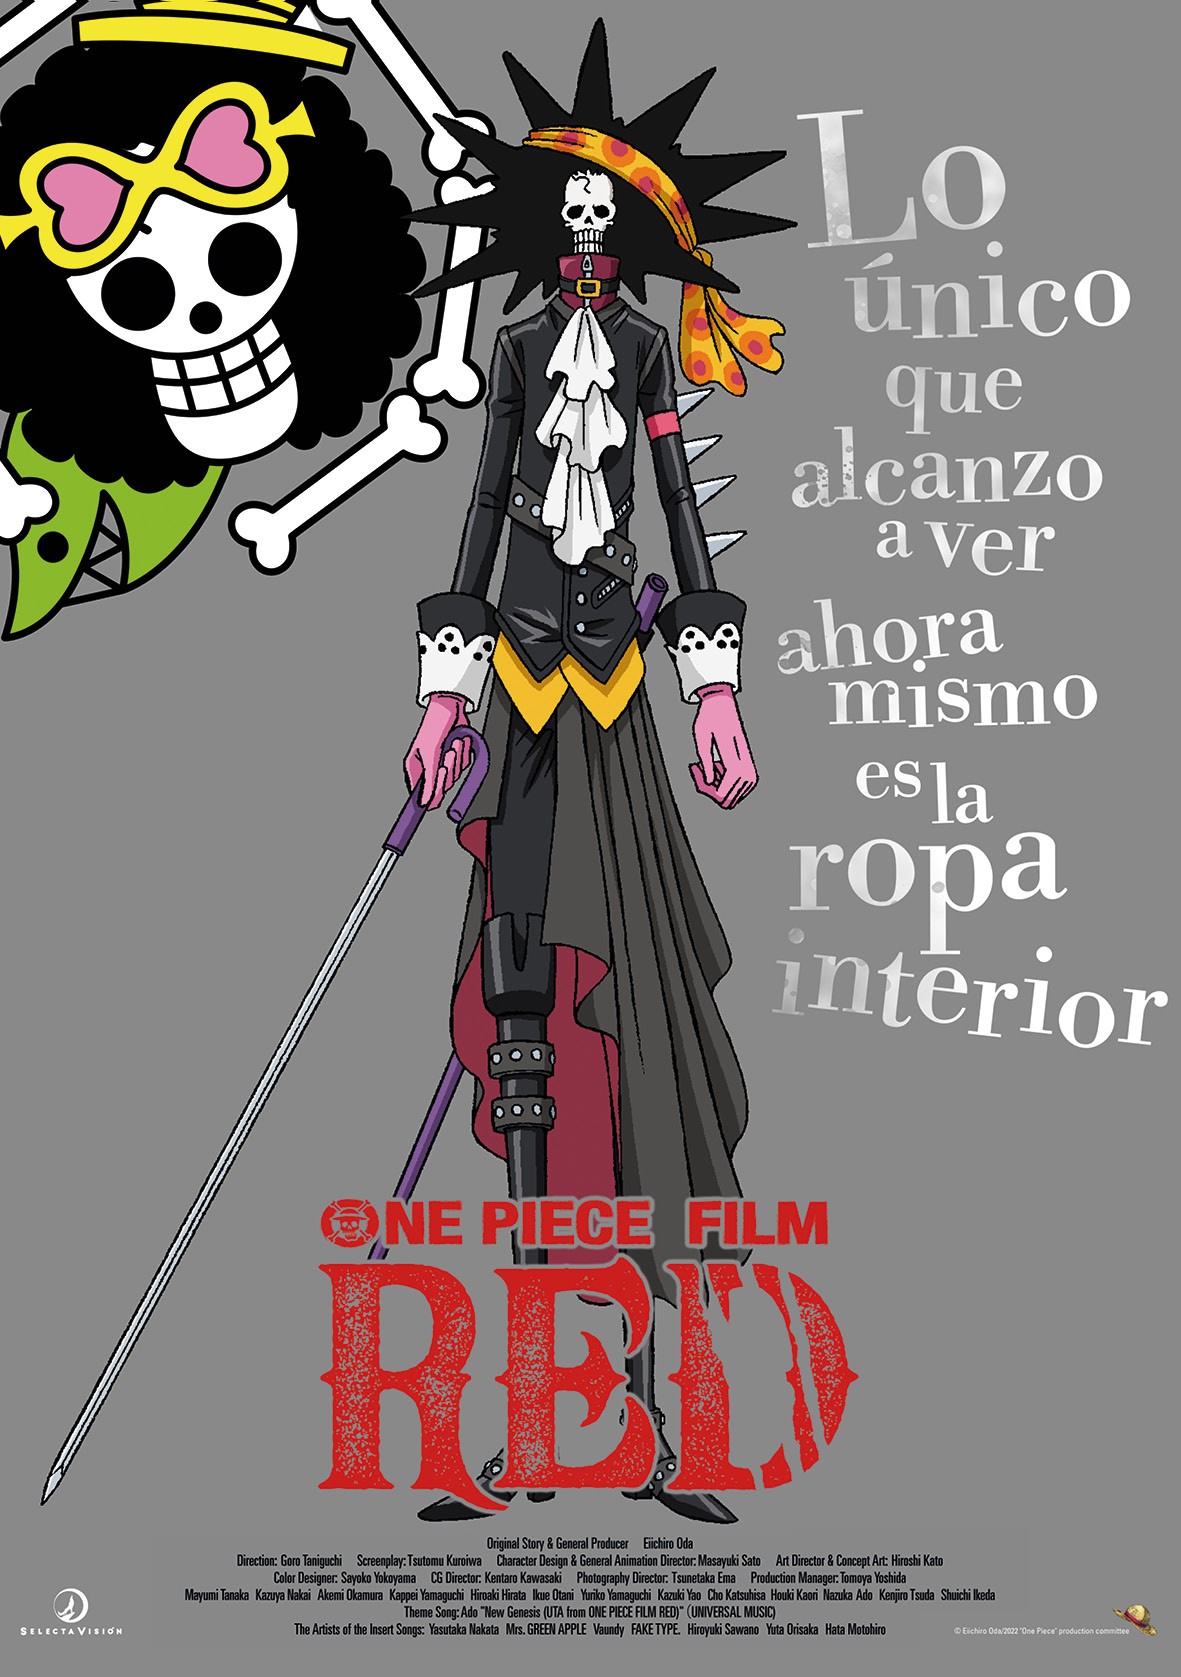 Brook Póster Personajes One Piece Film Red